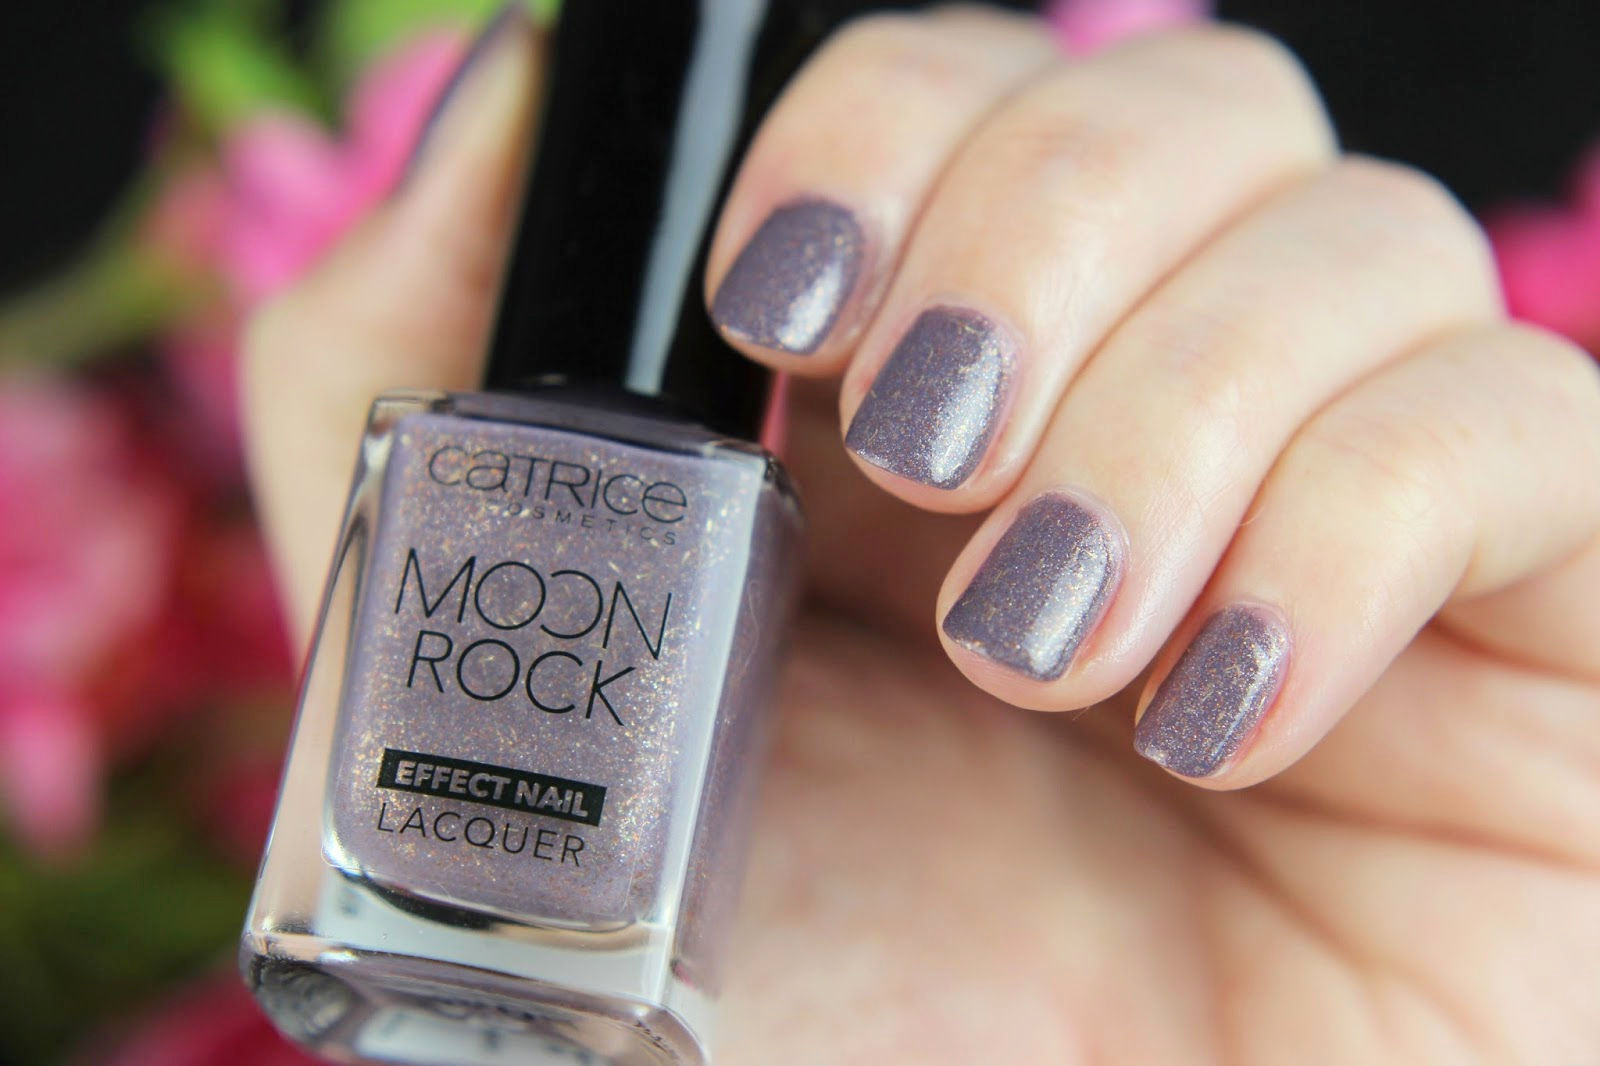 2016, CATRICE, drogerie, effect nail lacquer, glitzer, herbst, magical bluelight, moon rock, Moon Rock Effect Nail Lacquer, moonlight berriage, nagellack, nailpolish, neues sortiment, review, swatches, tragebilder, 